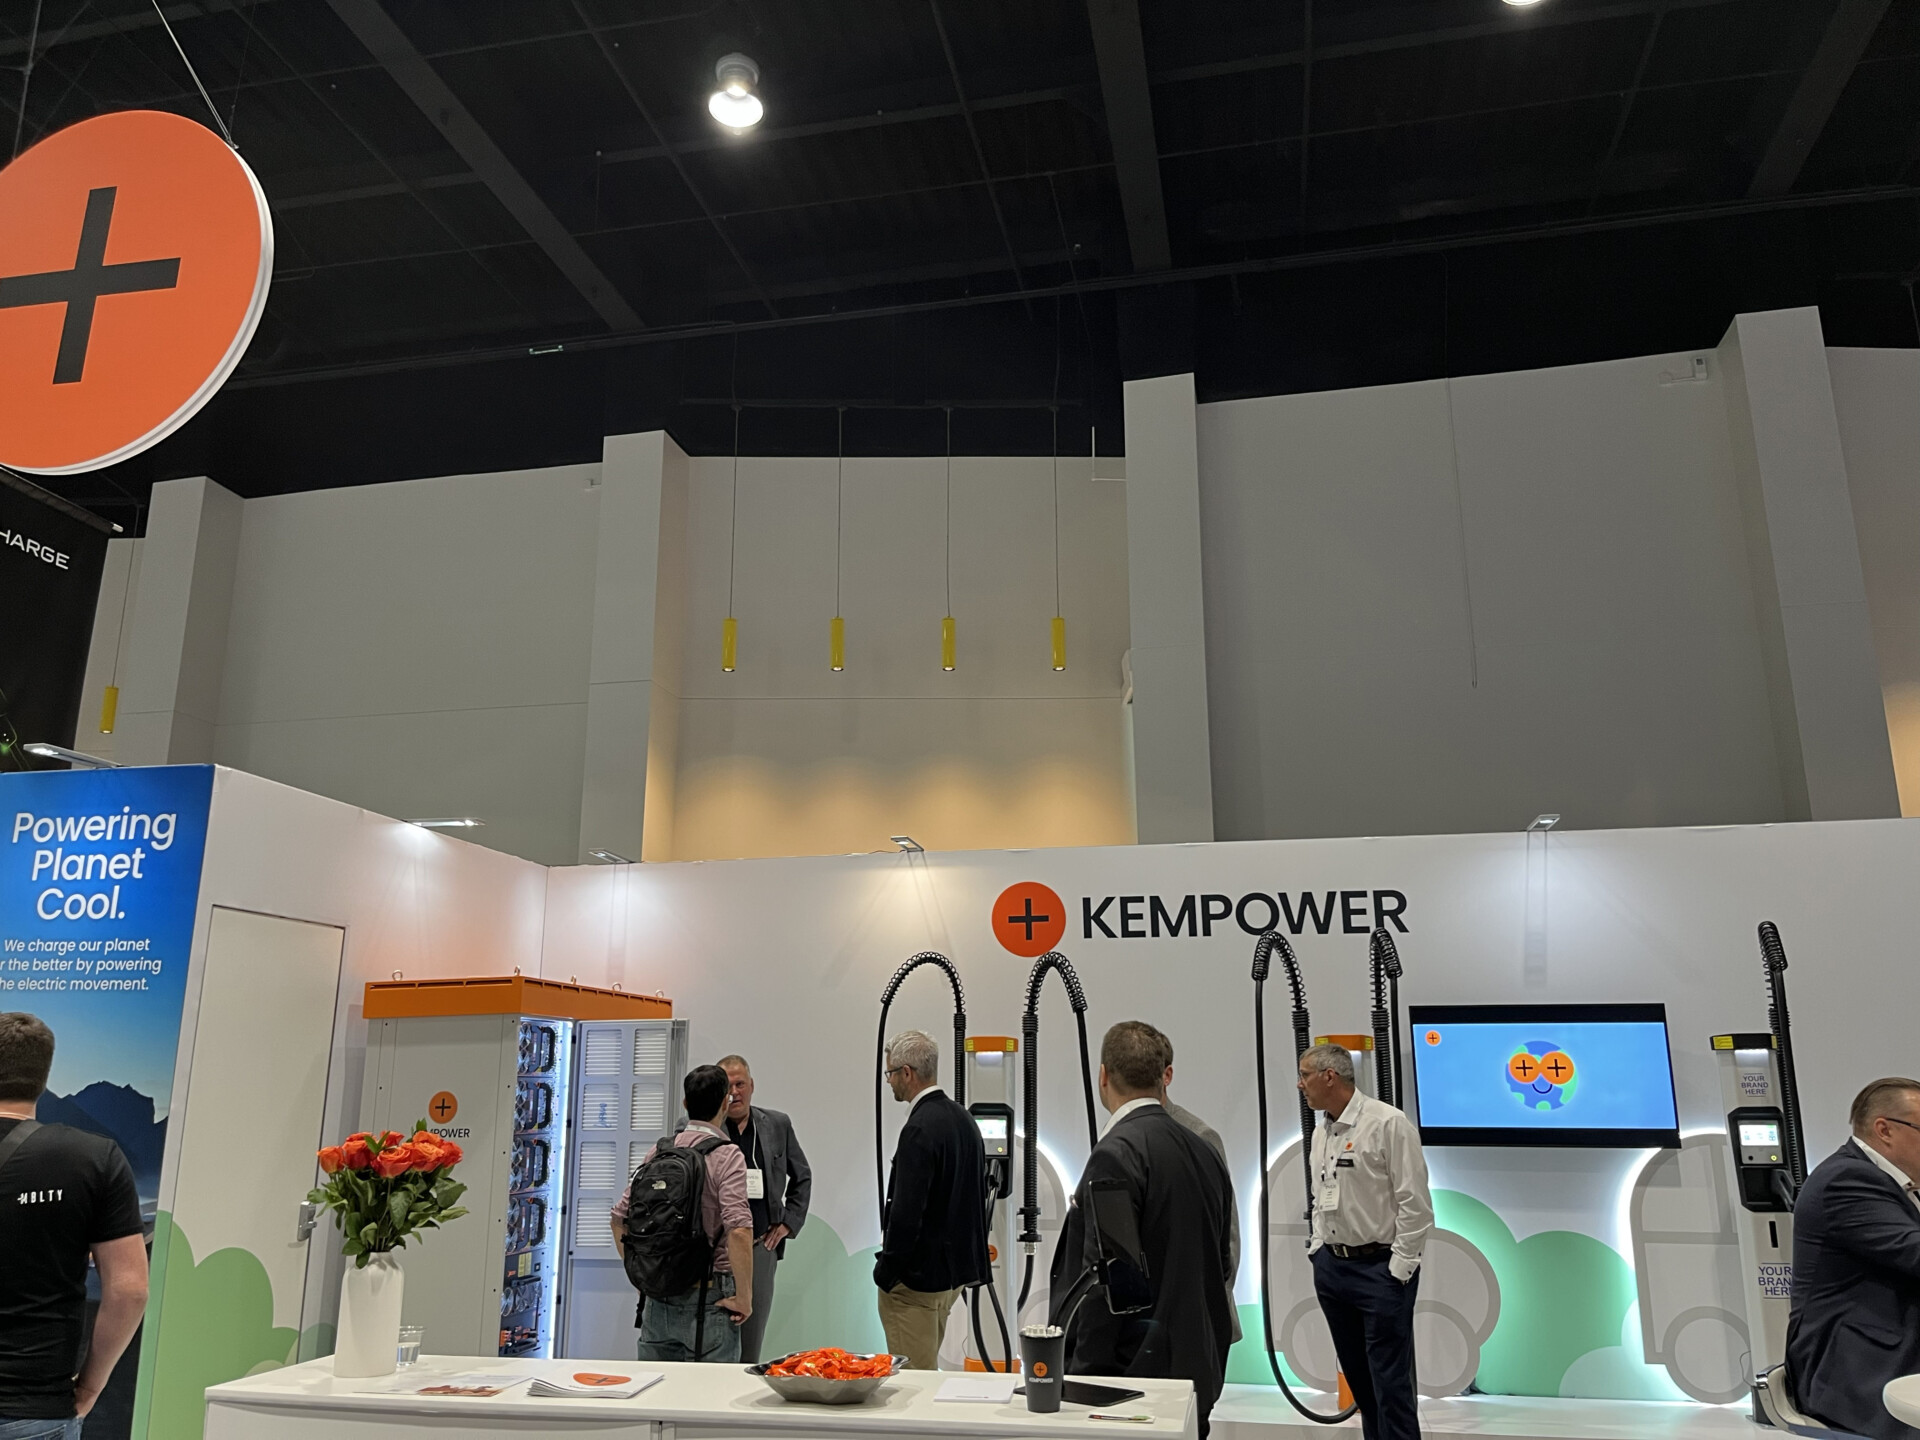 Visit Kempower at booth 1343 at MOVE America